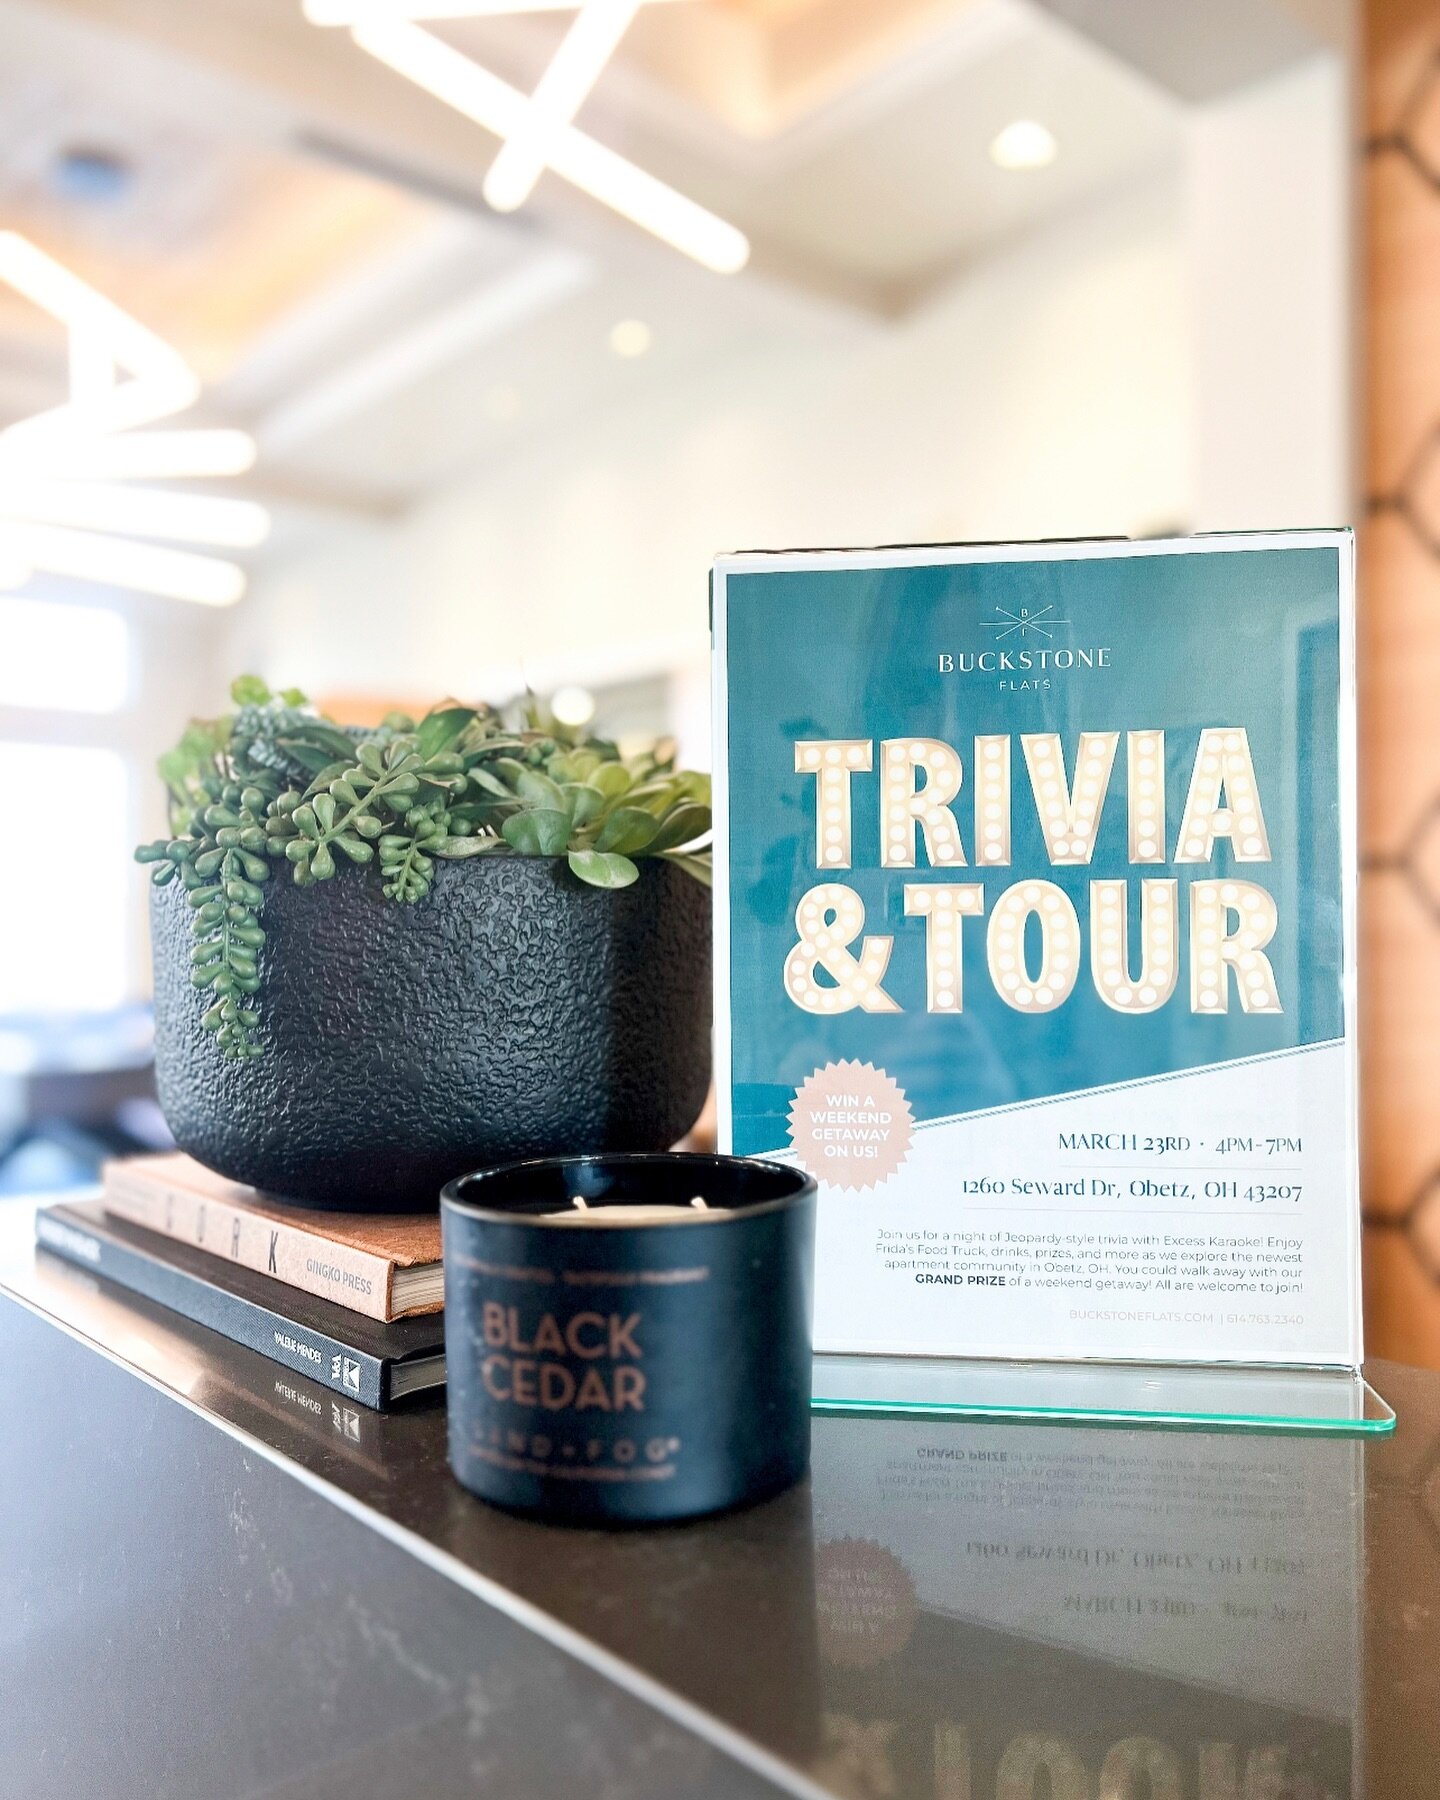 📆 Save the date! Trivia Night at Buckstone Flats on March 23rd, 4-7pm! 🤔🎉 Join the fun, feast on delectable bites from the food truck, and snag cool giveaways! 🍔🎁 Mark your calendar &ndash; it&rsquo;s a night you won&rsquo;t want to miss!